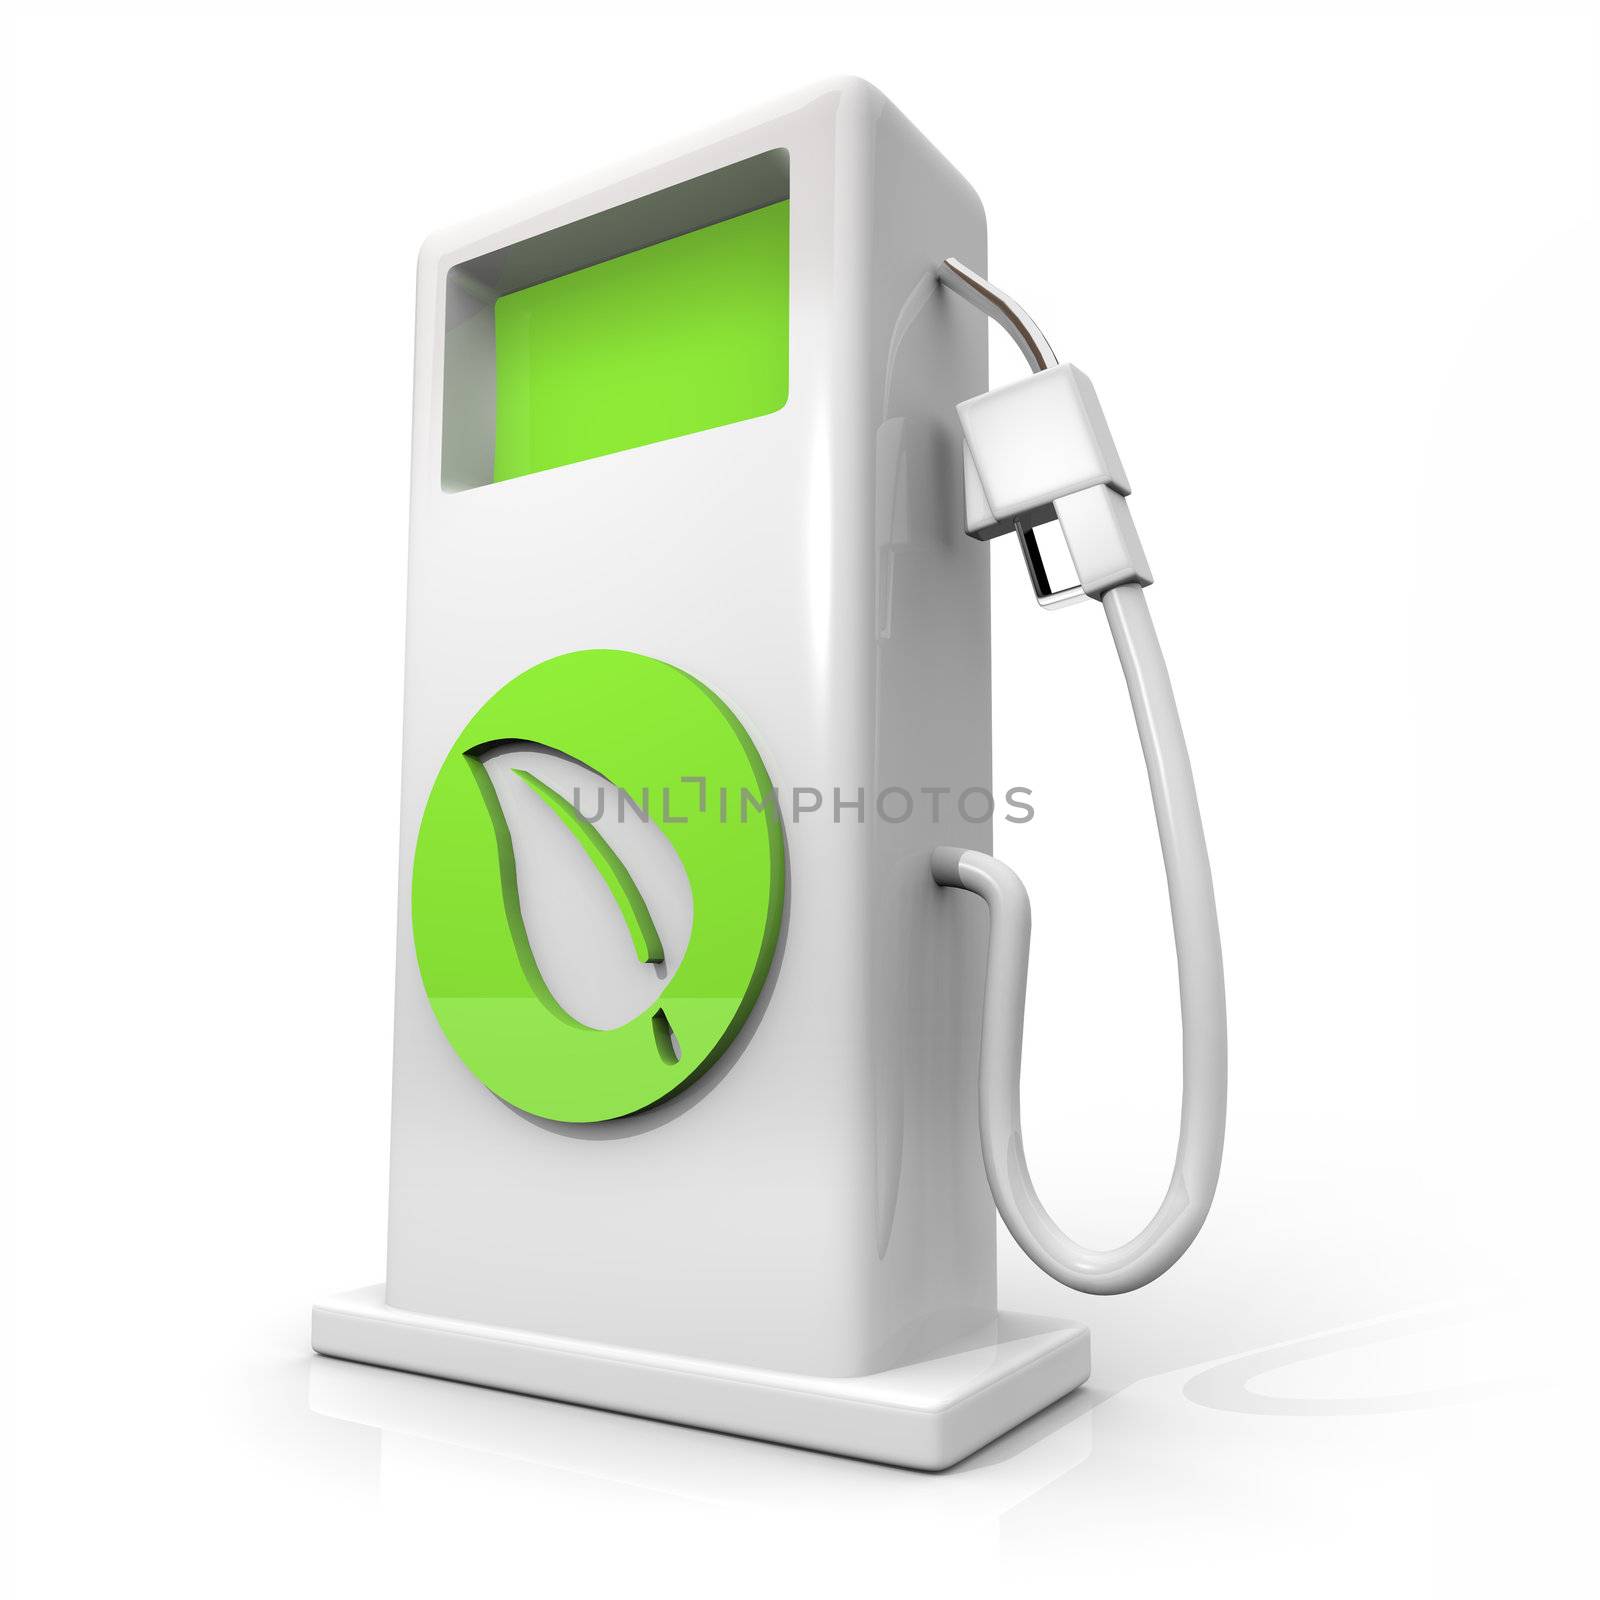 A white pump of alternative fuel with a green leaf symbol on it symbolizing earth friendliness